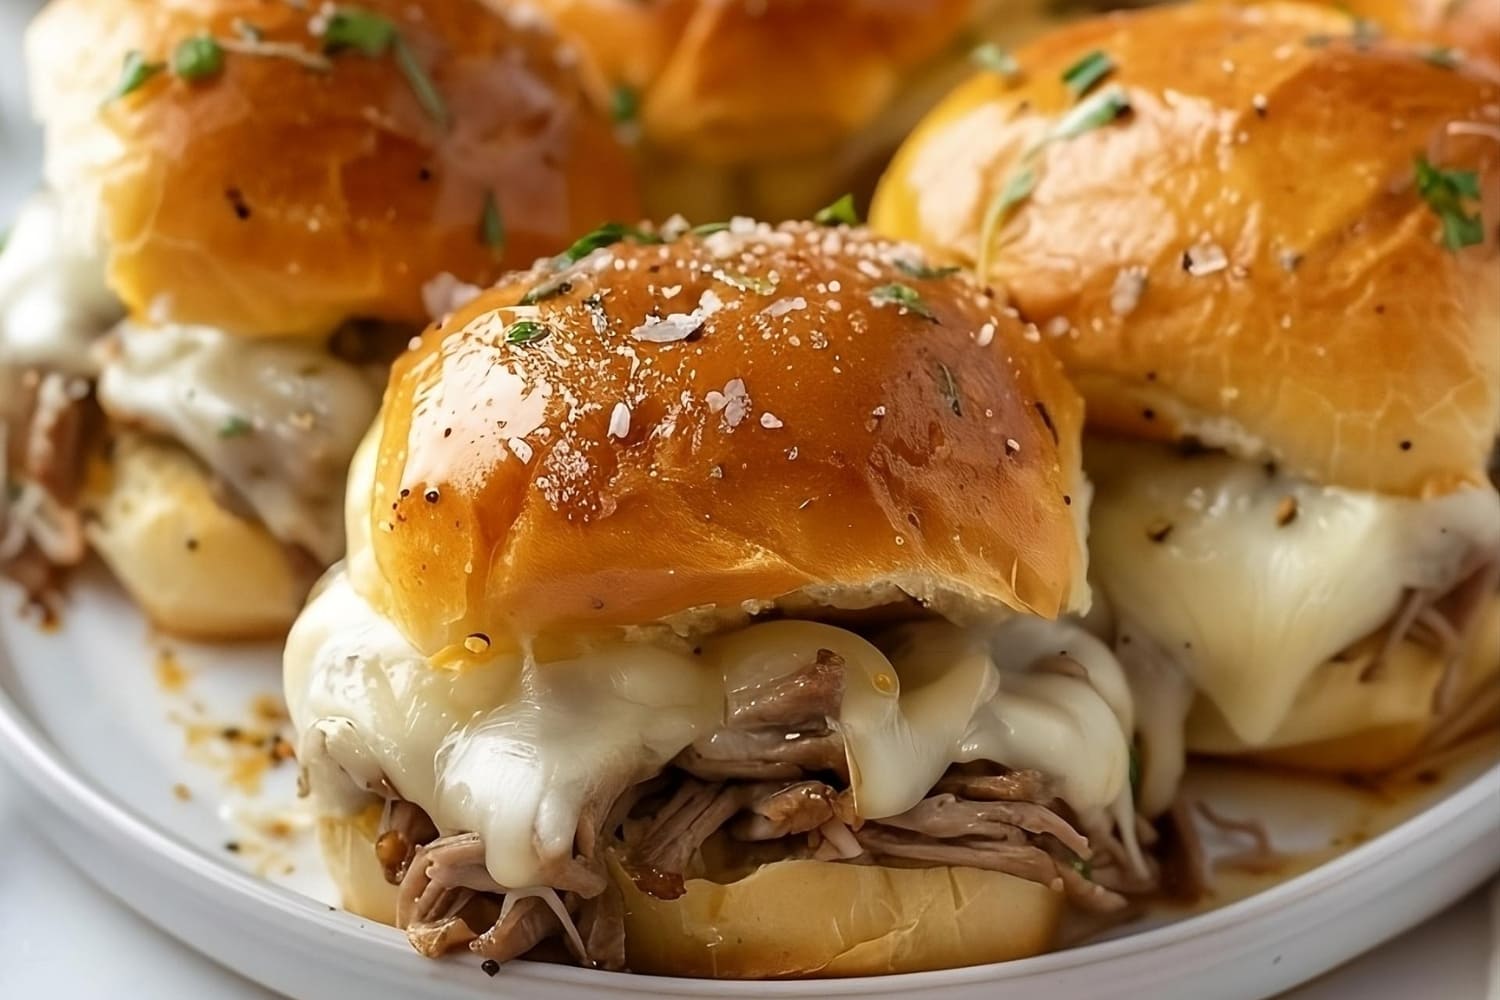 Philly Cheesesteak Sliders served on a white plate filled with melted cheese and beef filling.